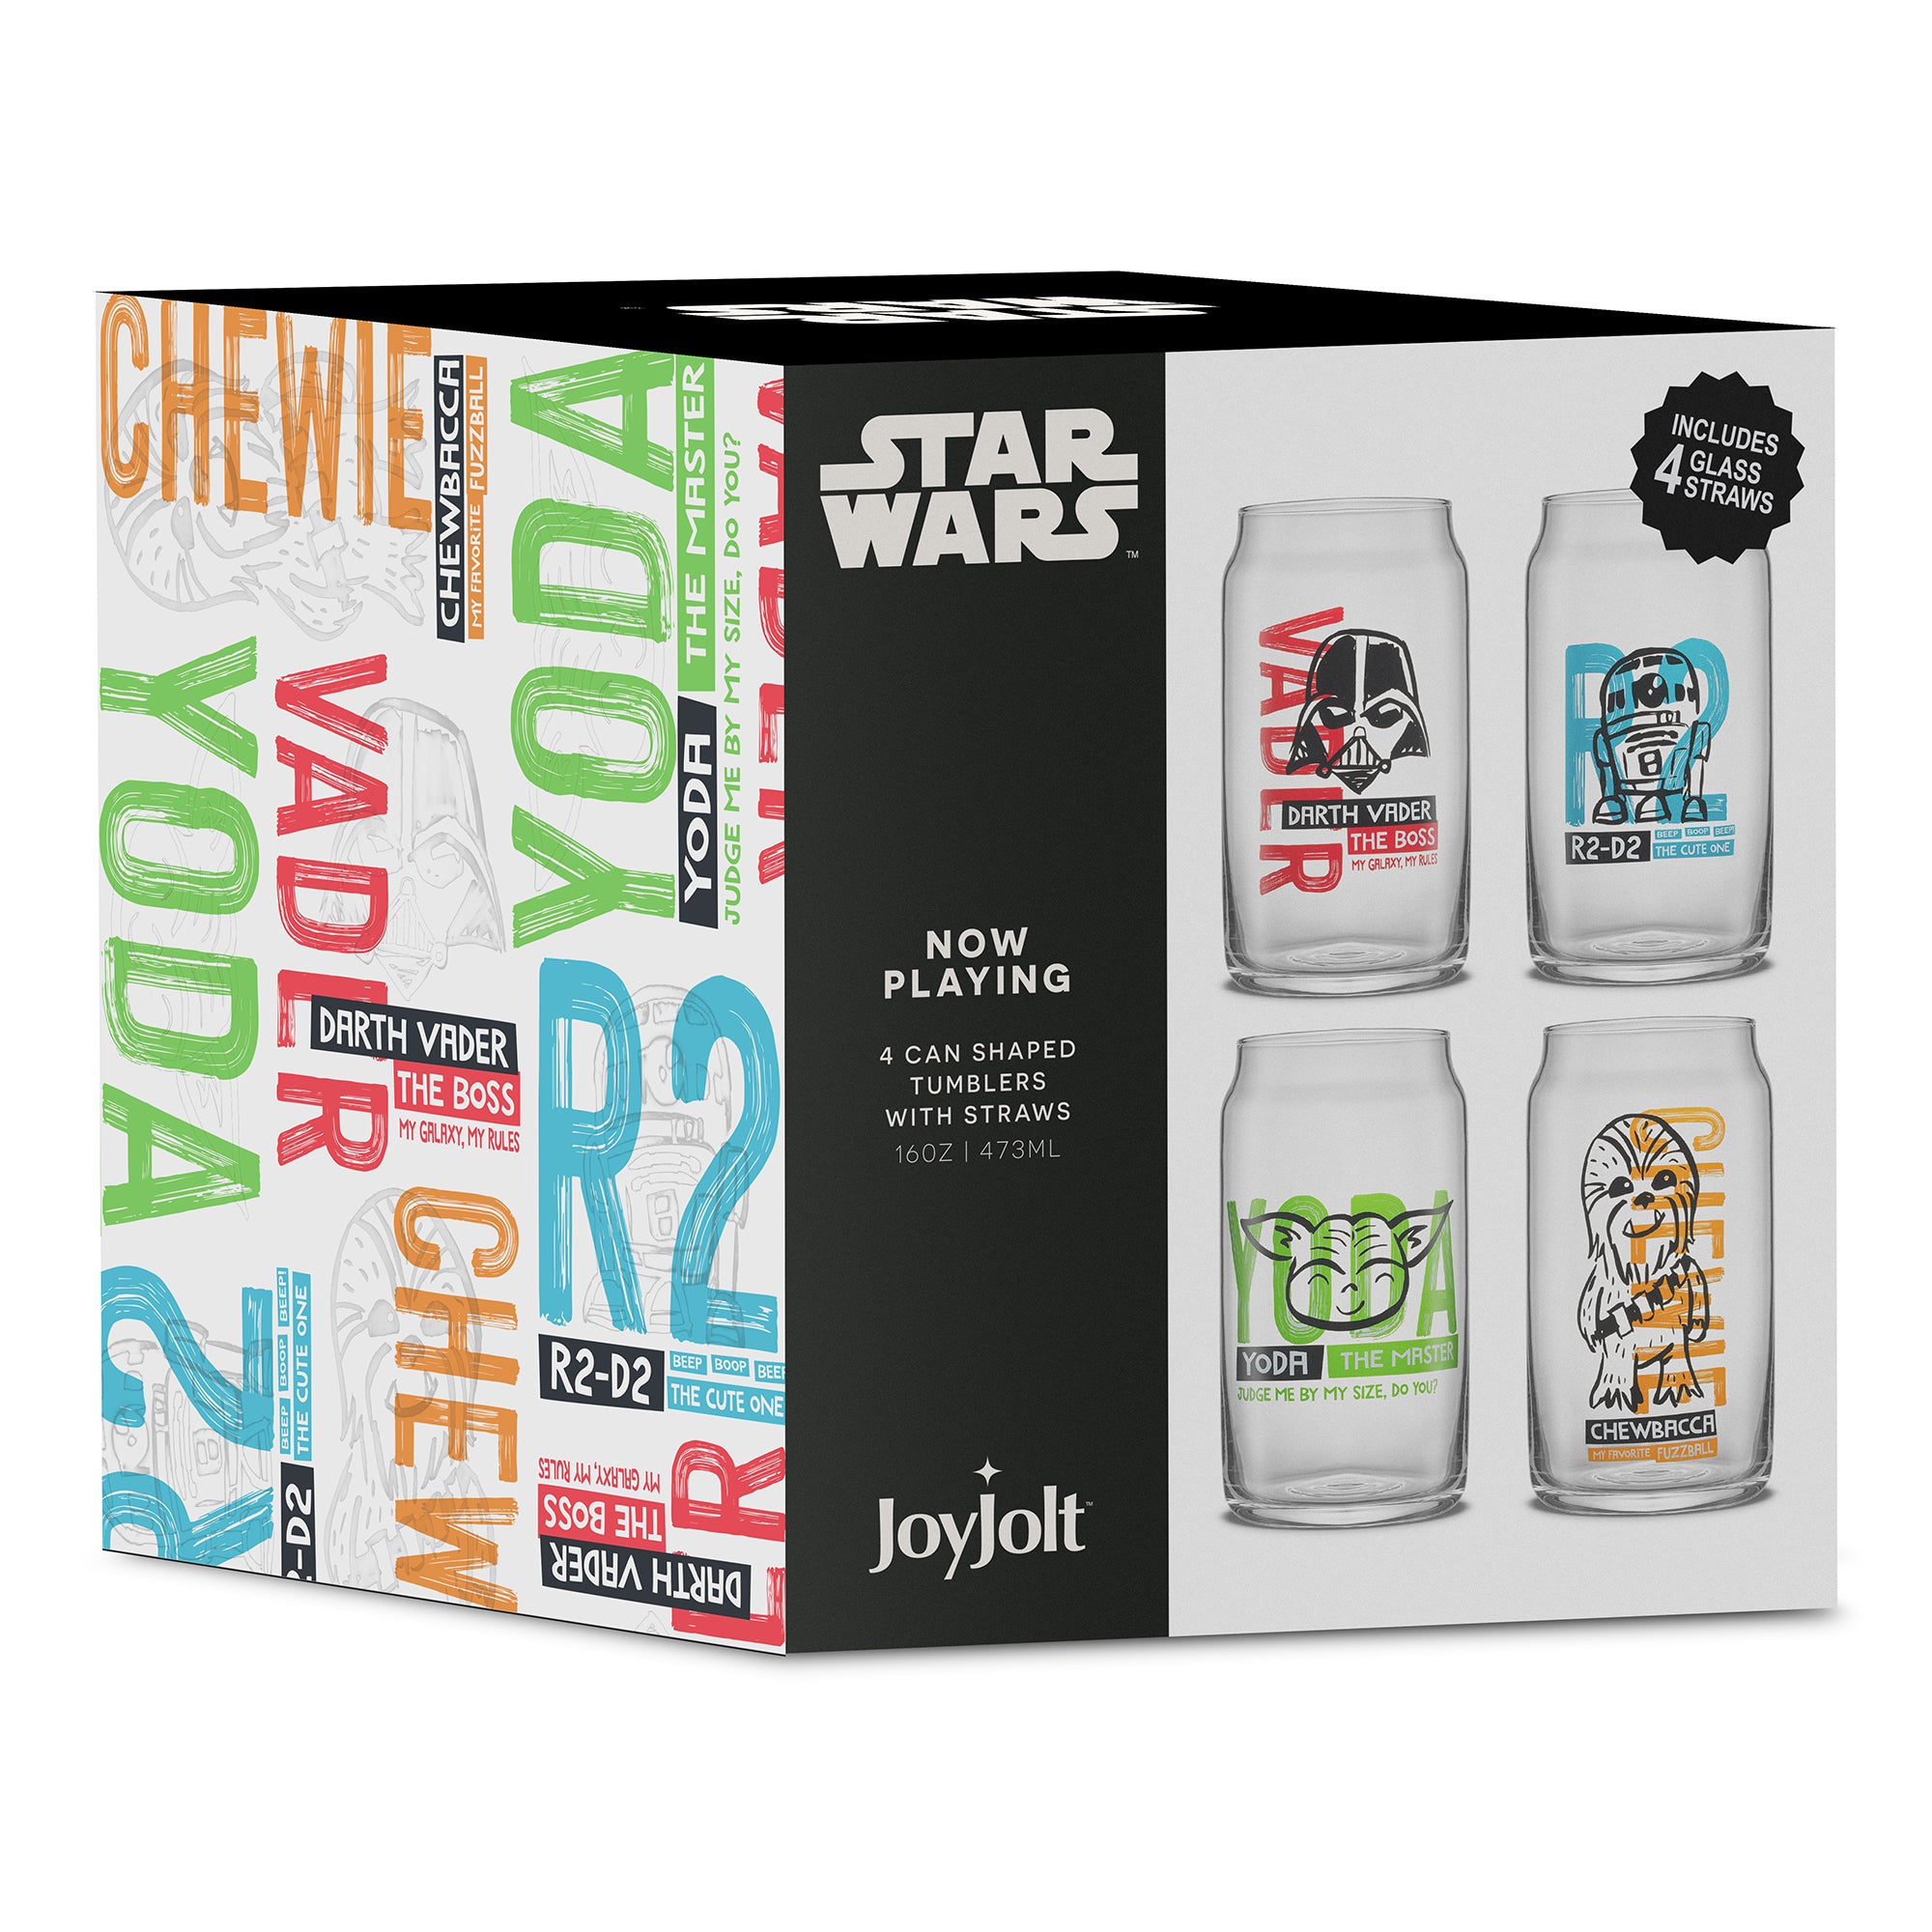 JoyJolt's Star Wars 'Now Playing' glass tumbler set collector's box featuring the designs.